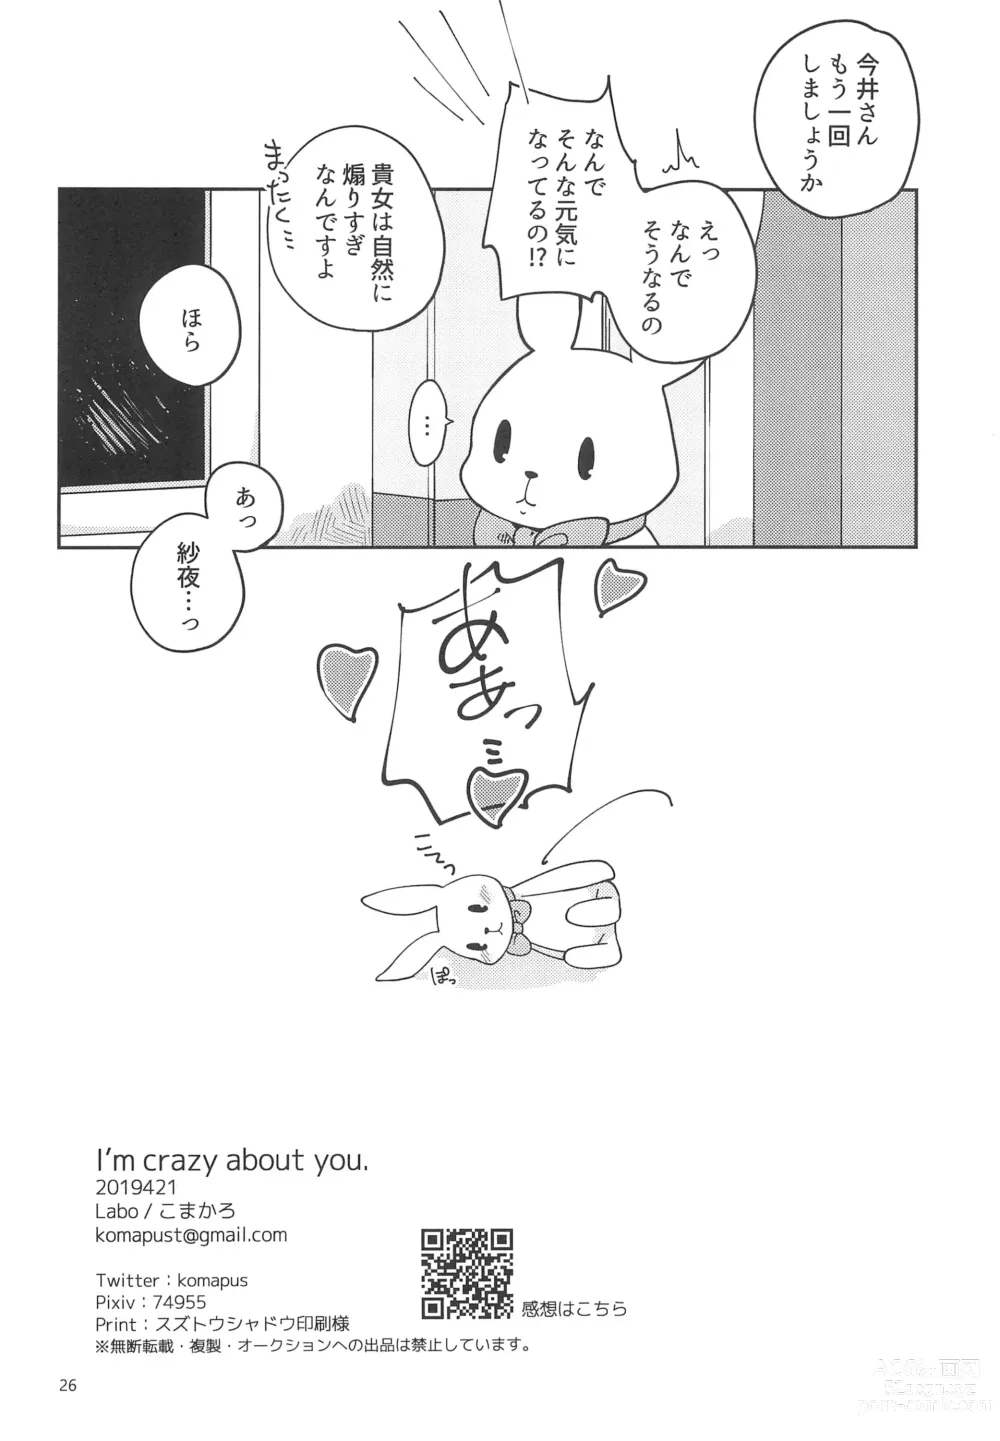 Page 28 of doujinshi I’m crazy about you.